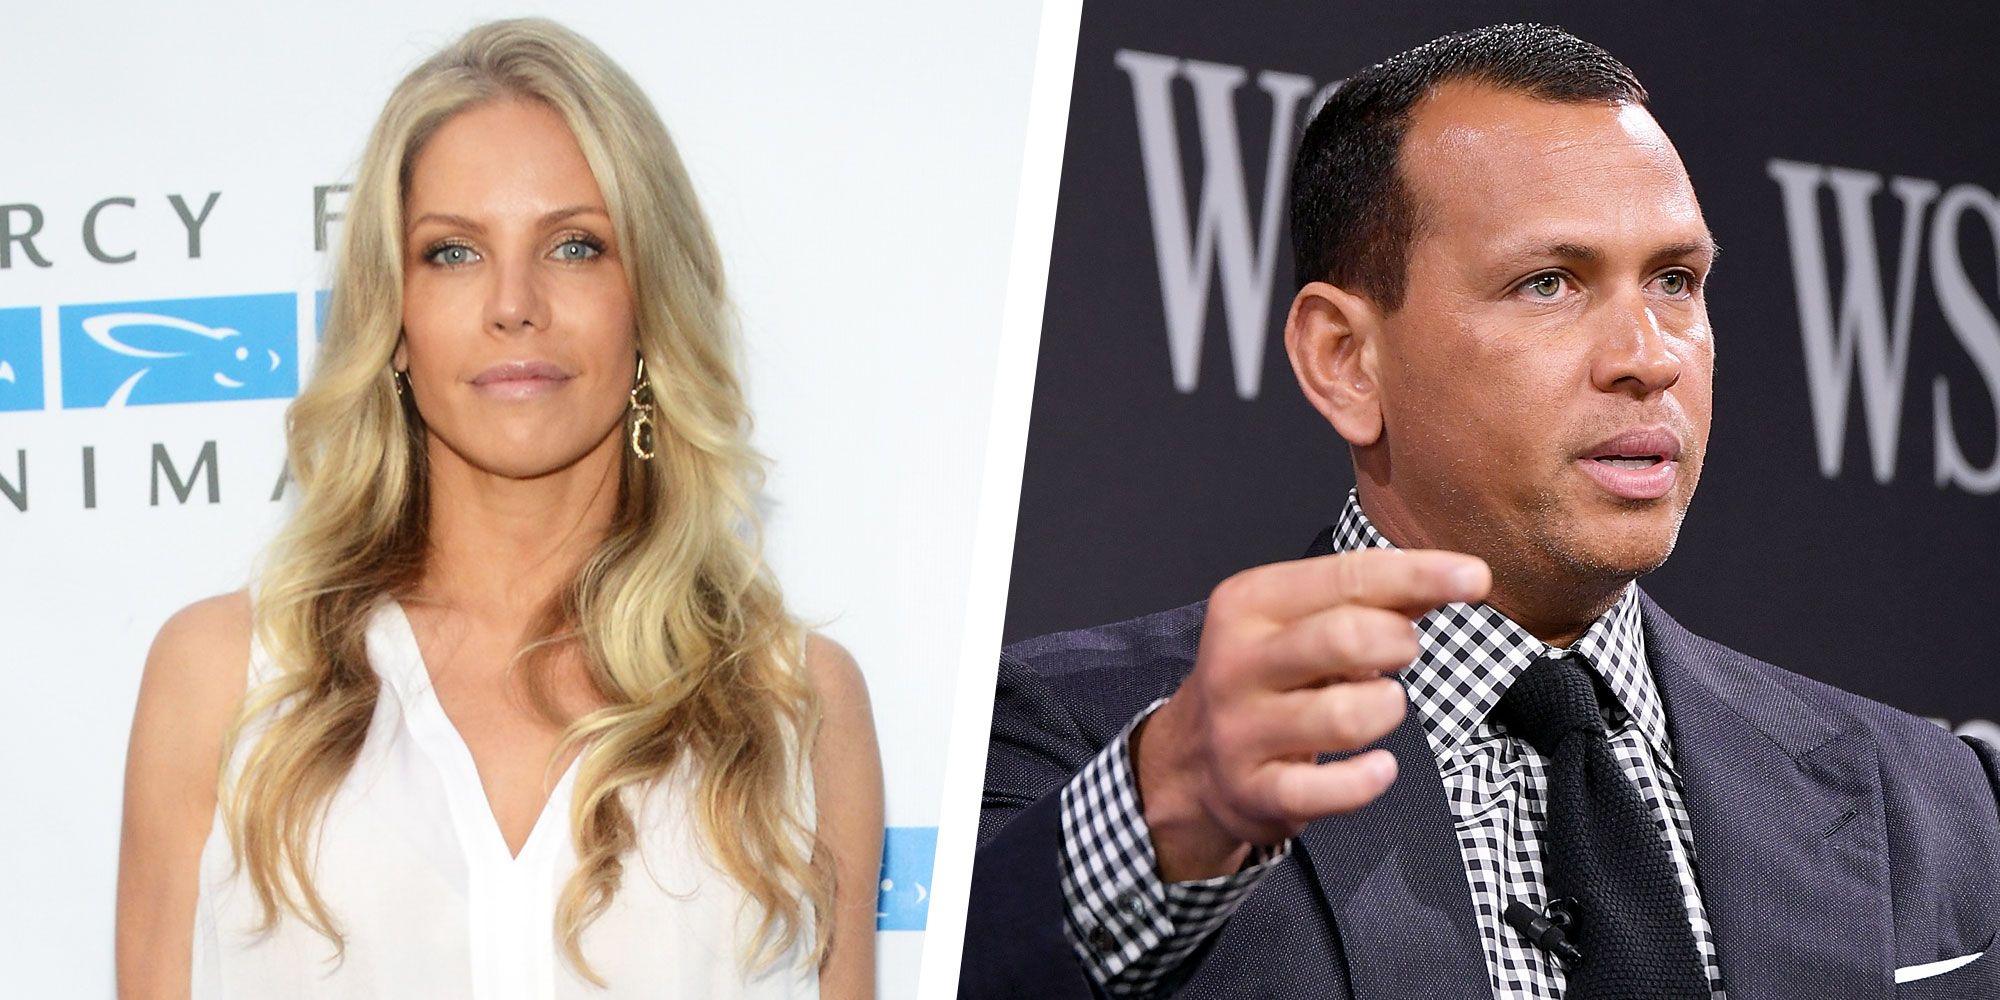 Jose Cansecos Ex-Wife Jessica Denies A-Rod Affair on Twitter